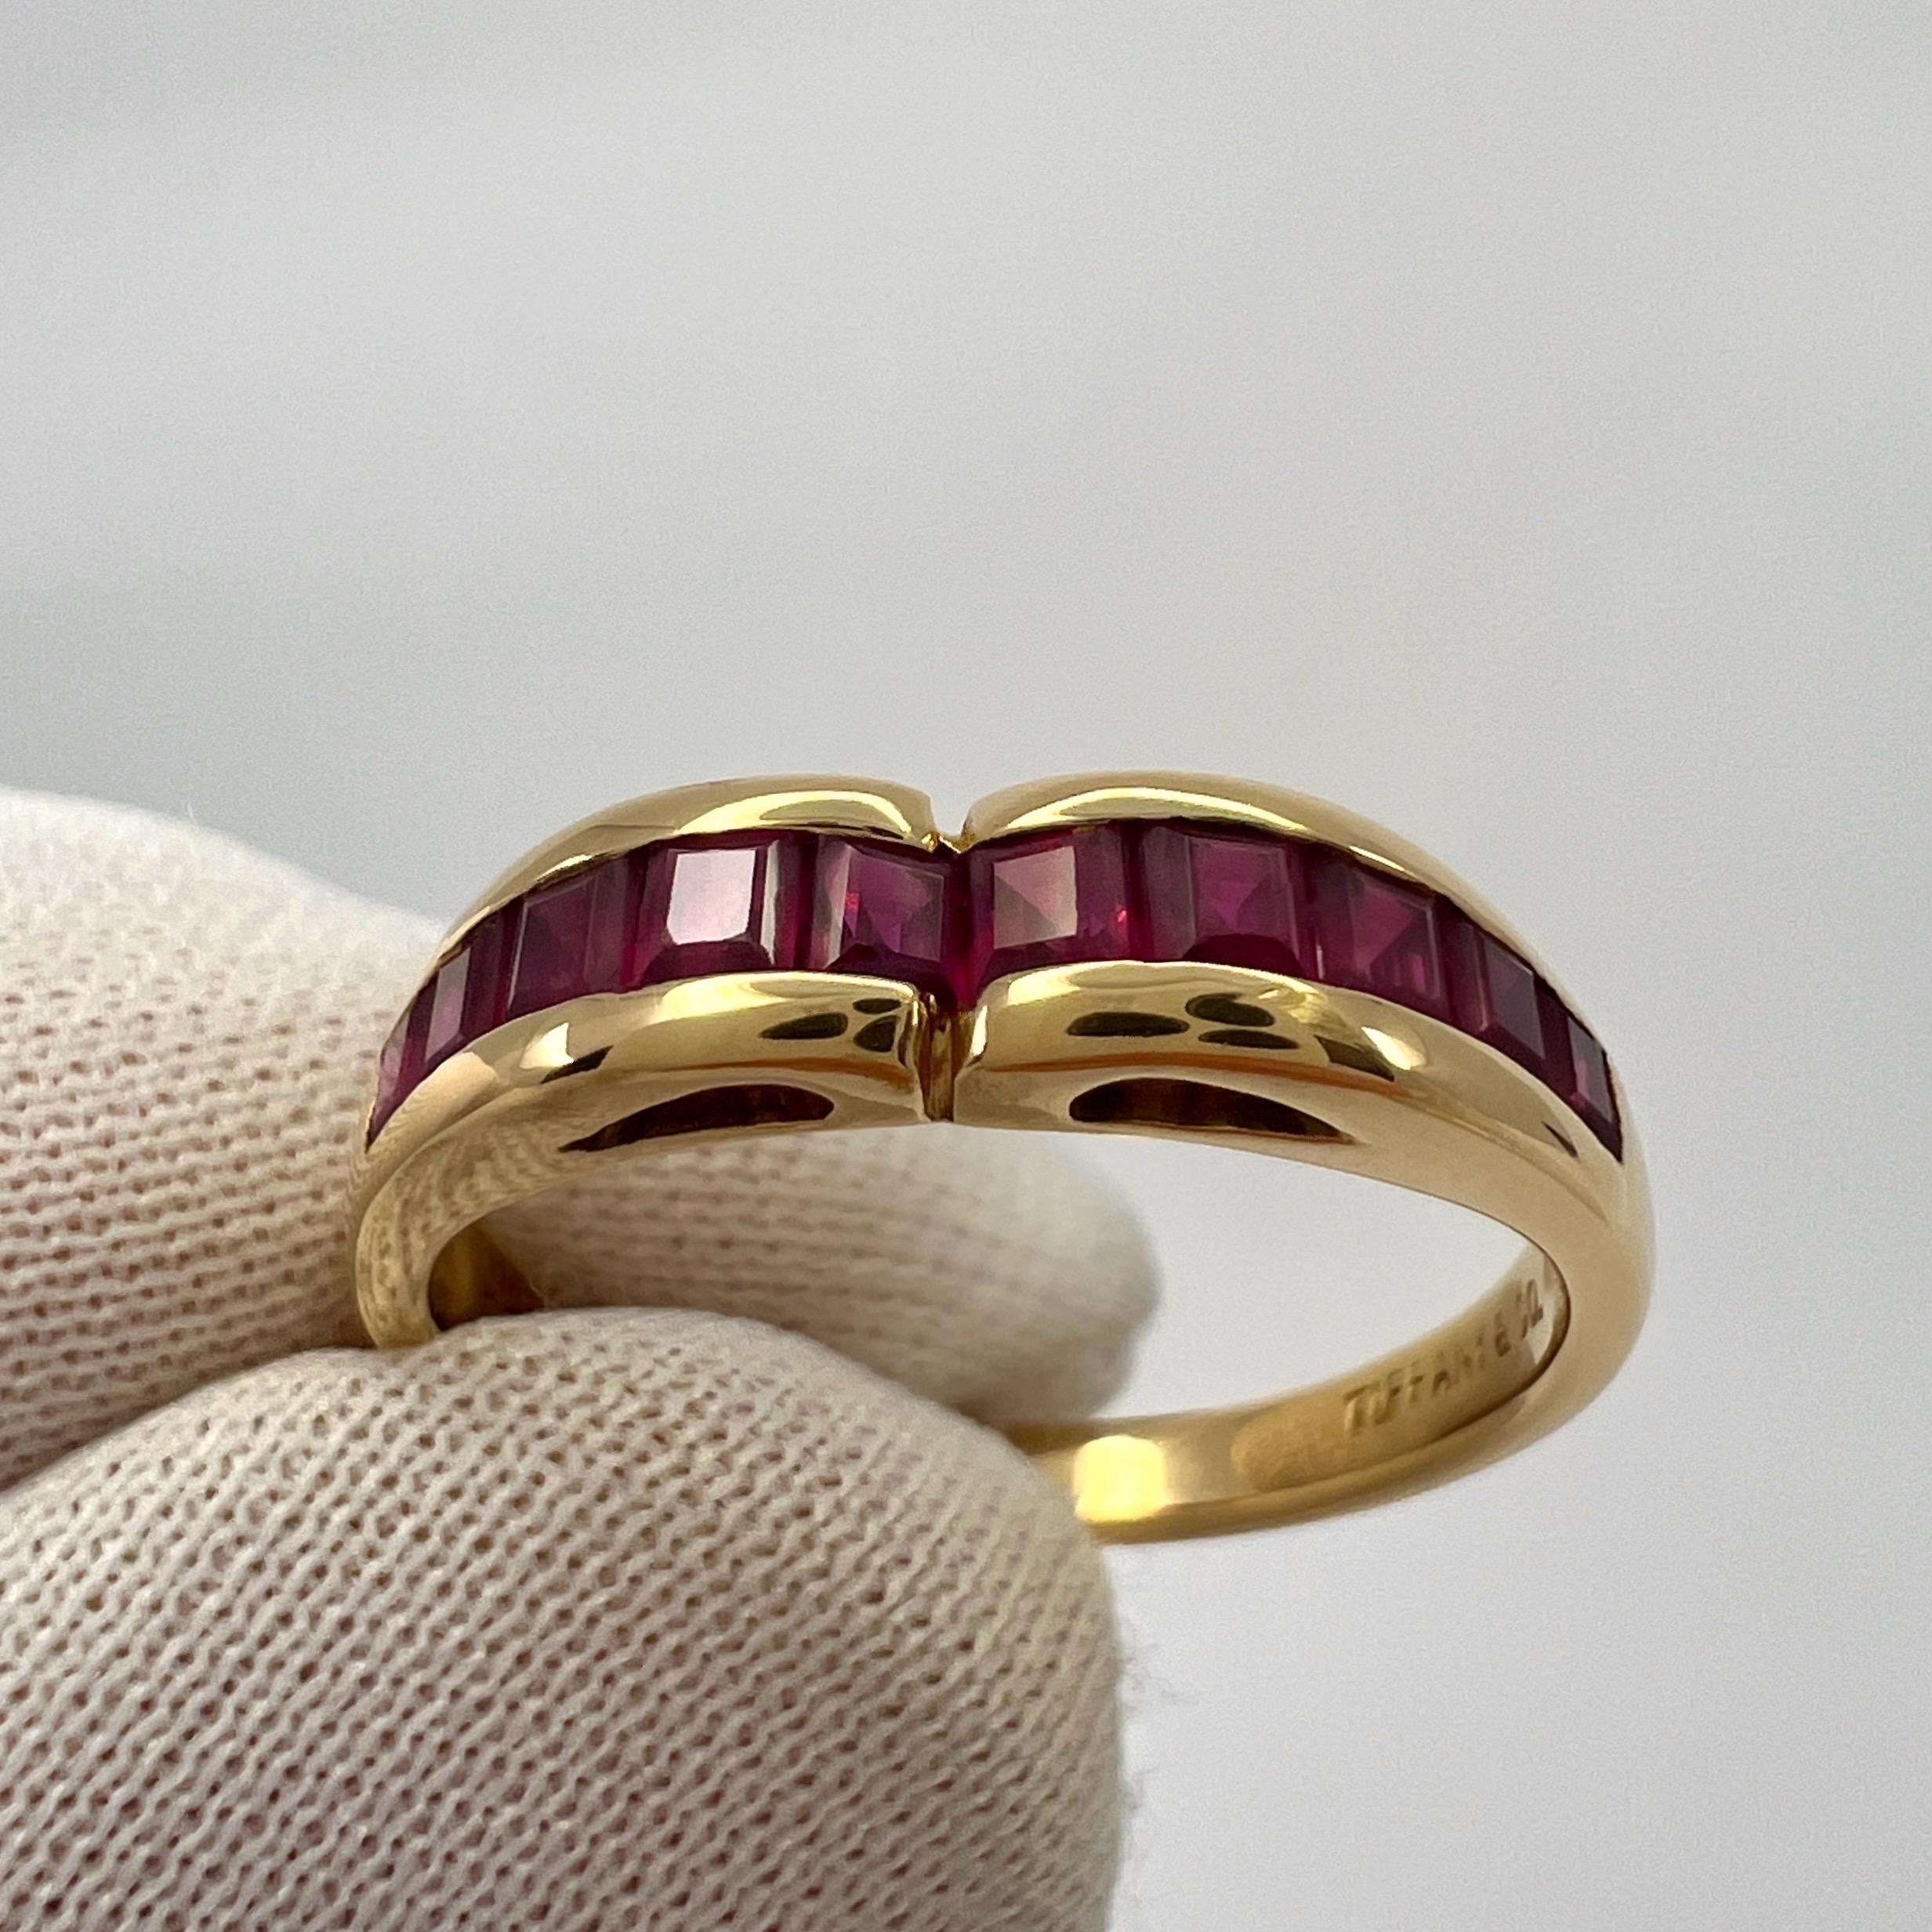 Tiffany & Co. Red Ruby Square Princess Cut 18k Yellow Gold Eternity Band Ring 3